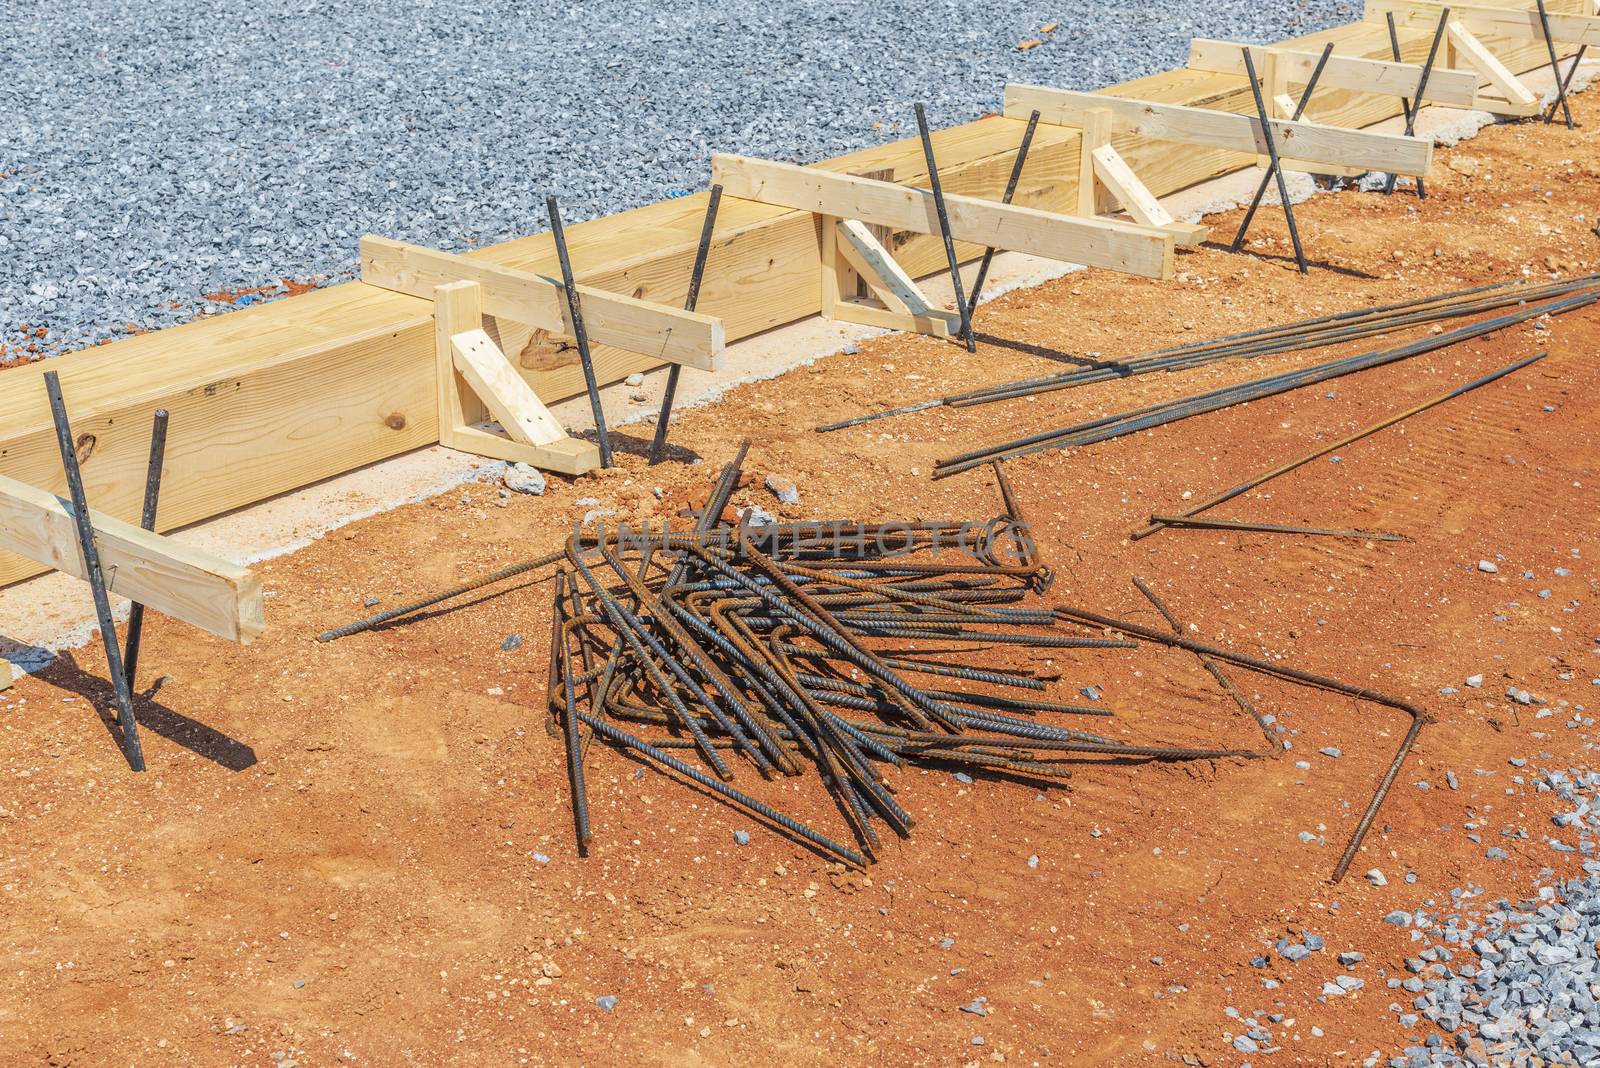 Wooden Framing and Iron Rods In Preparation For Concrete Pouring by stockbuster1